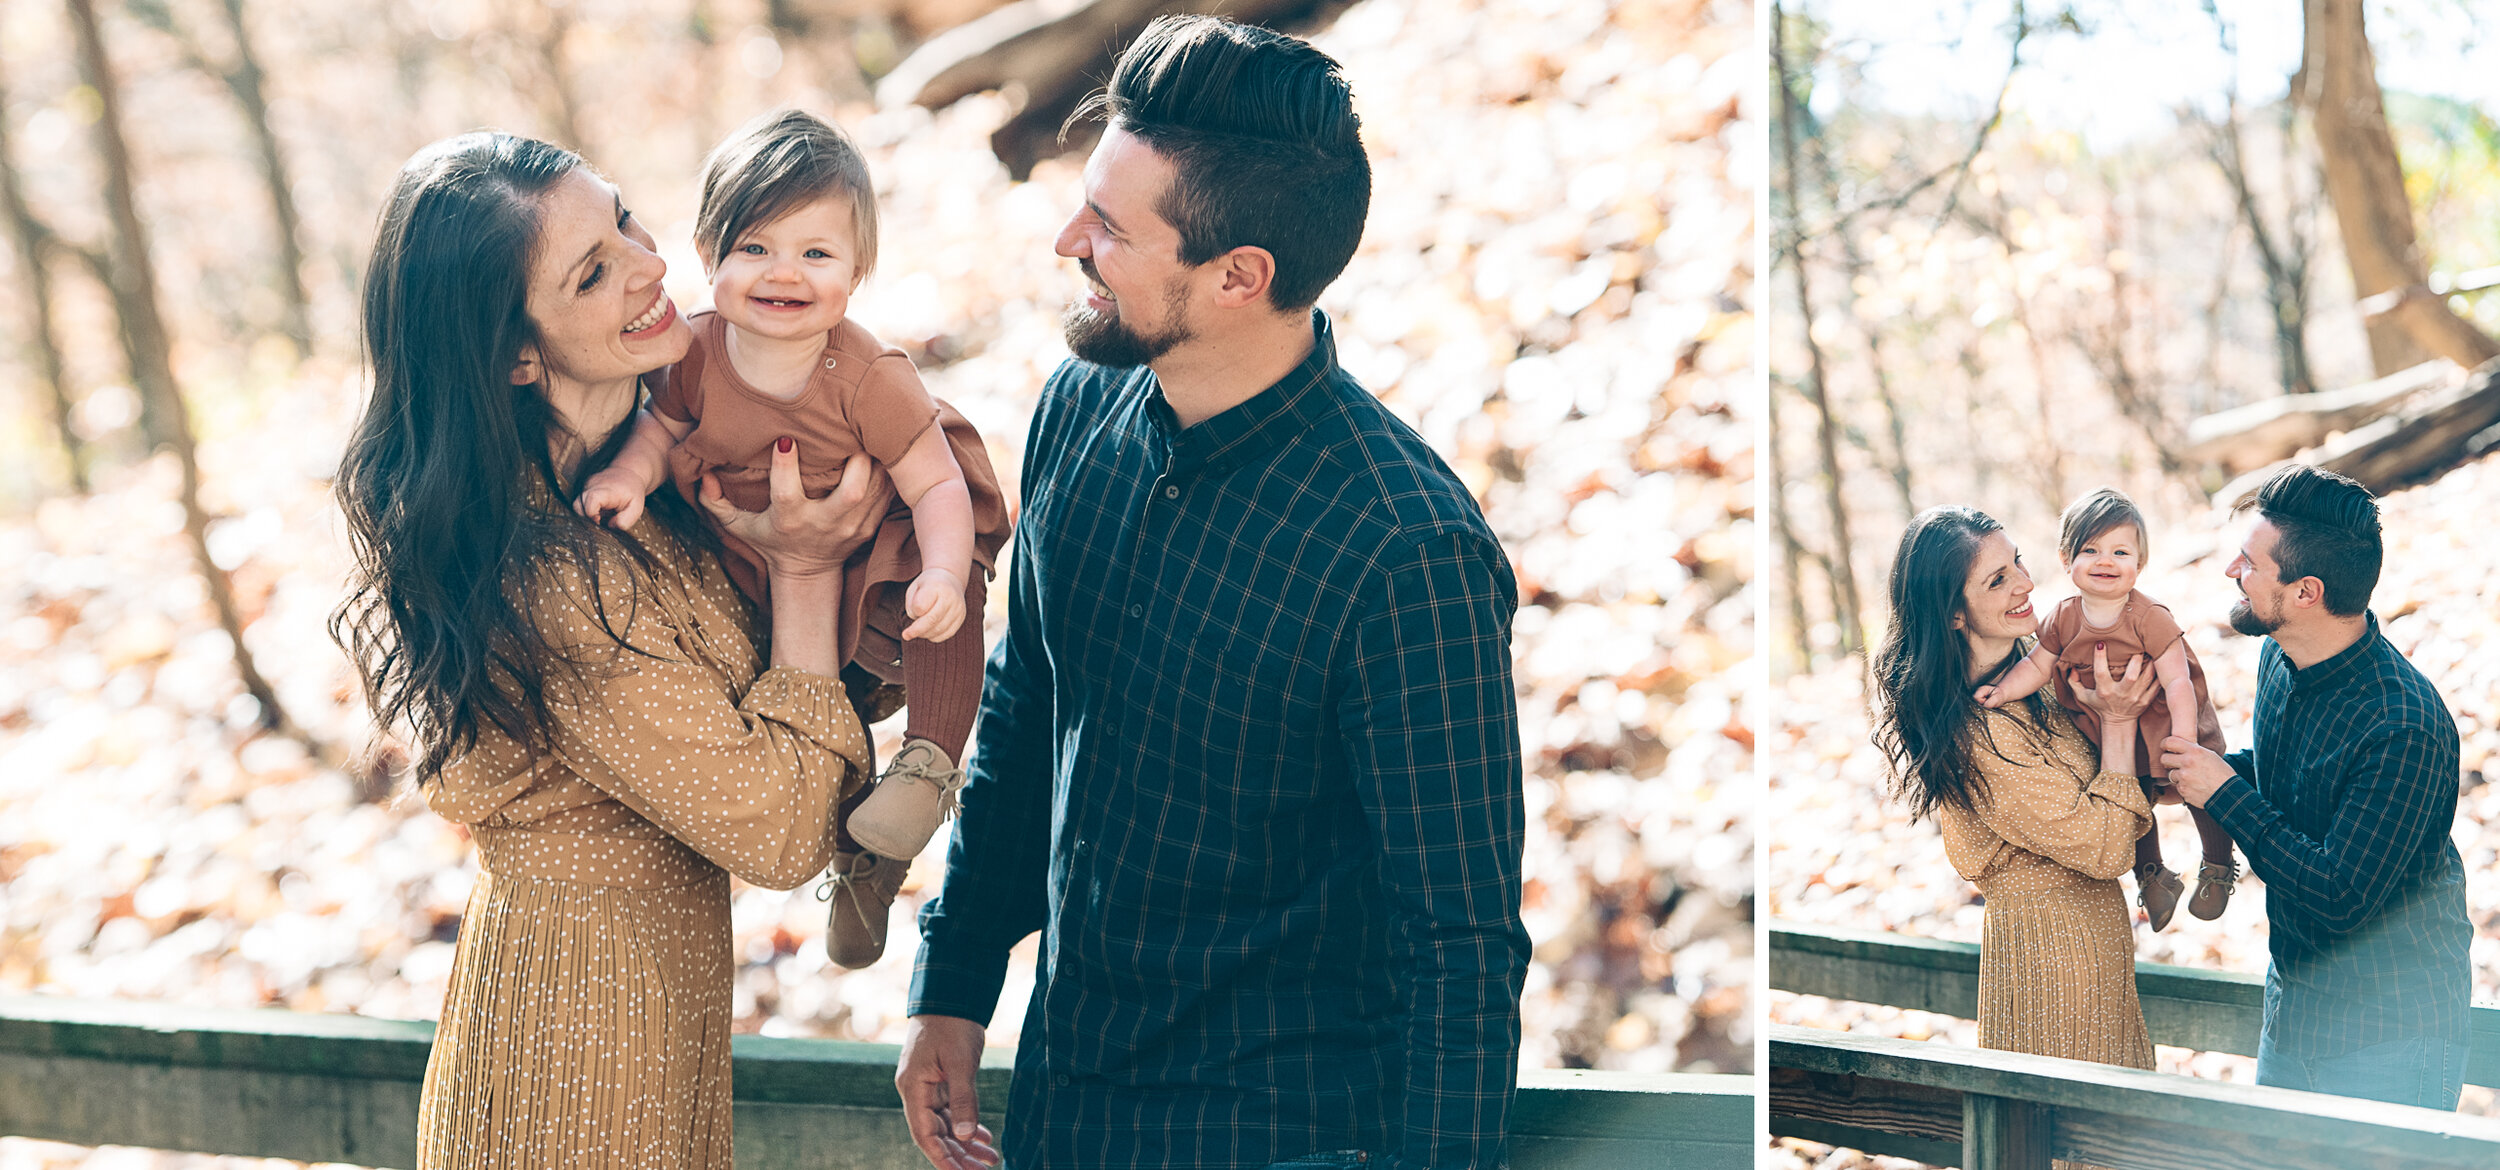 pittsburgh family photography session, mariah fisher photography, fall session.jpg